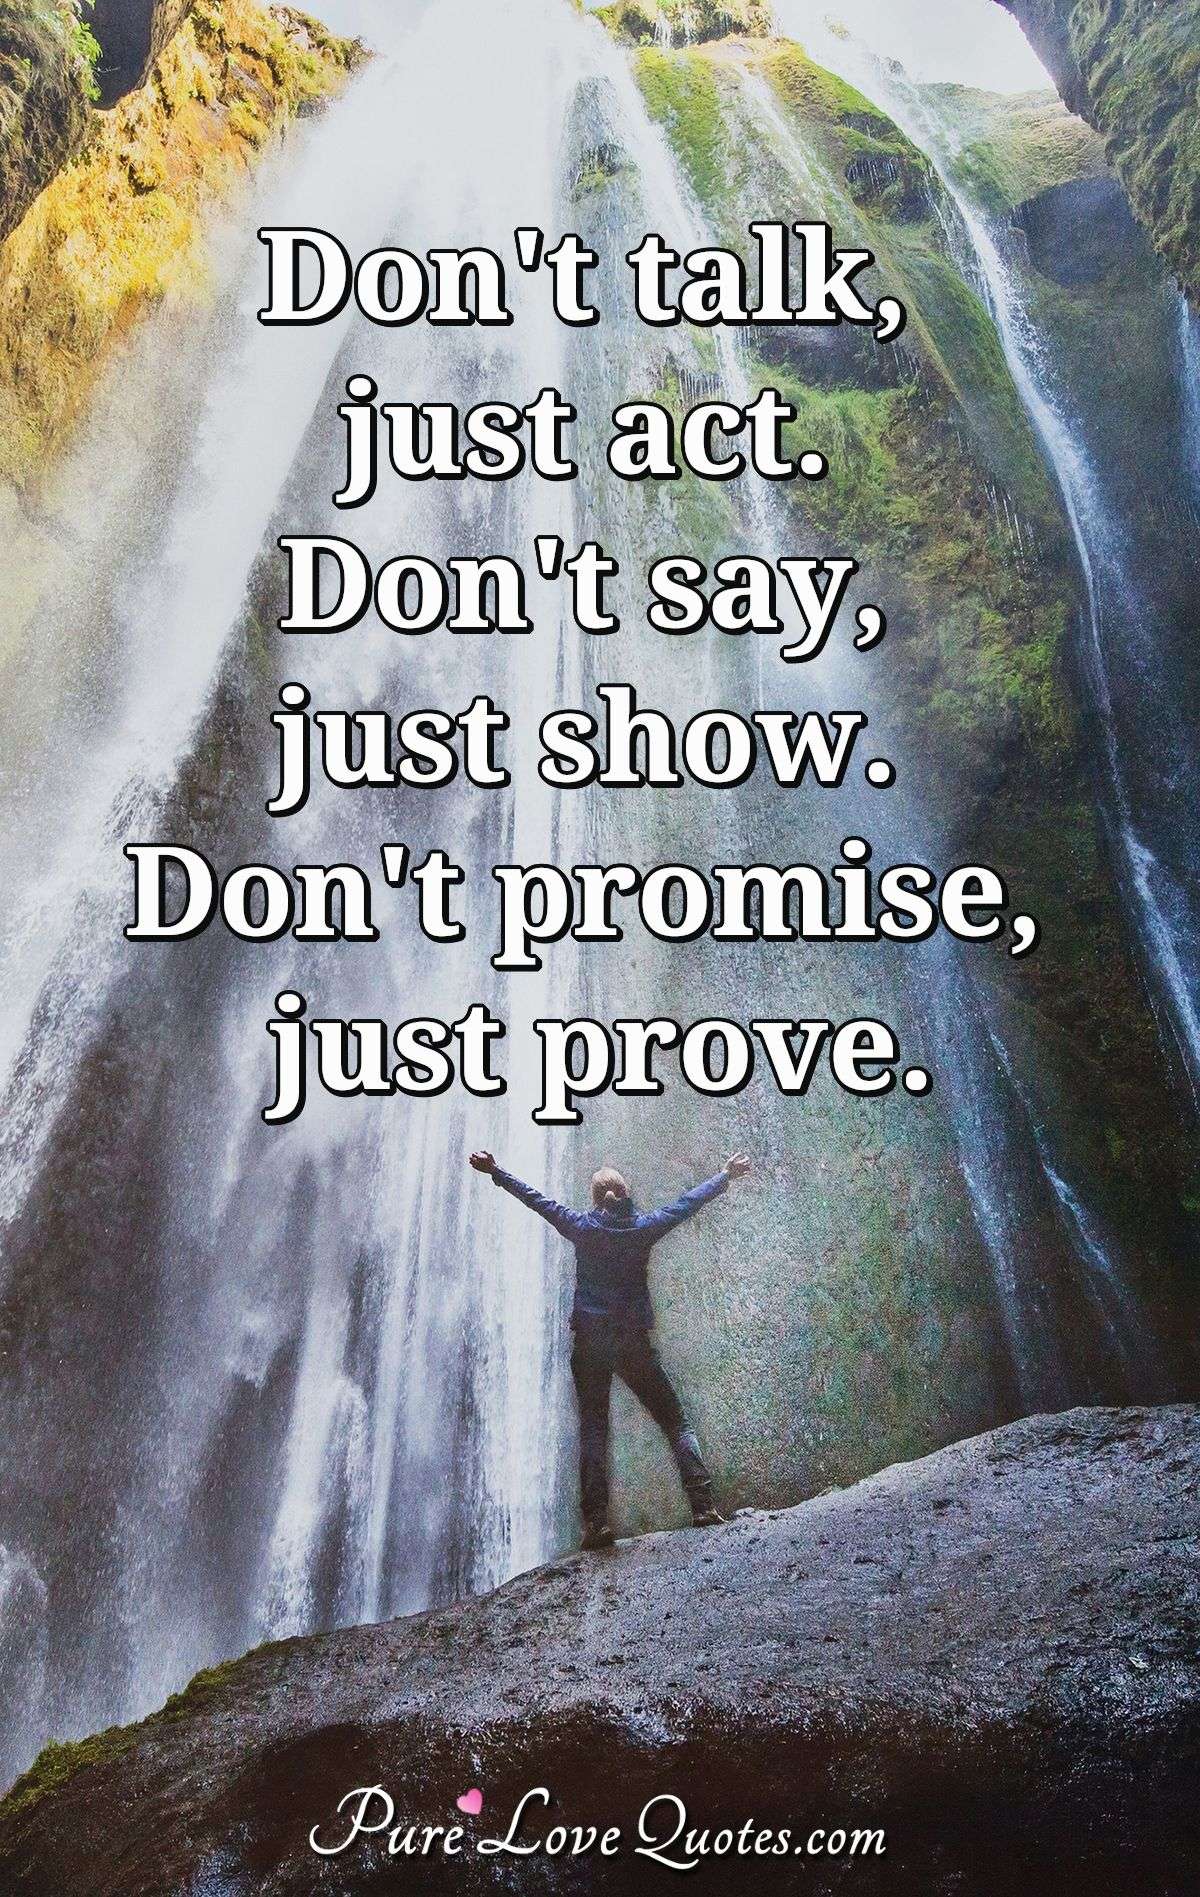 Don't talk, just act. Don't say, just show. Don't promise, just prove. - Anonymous